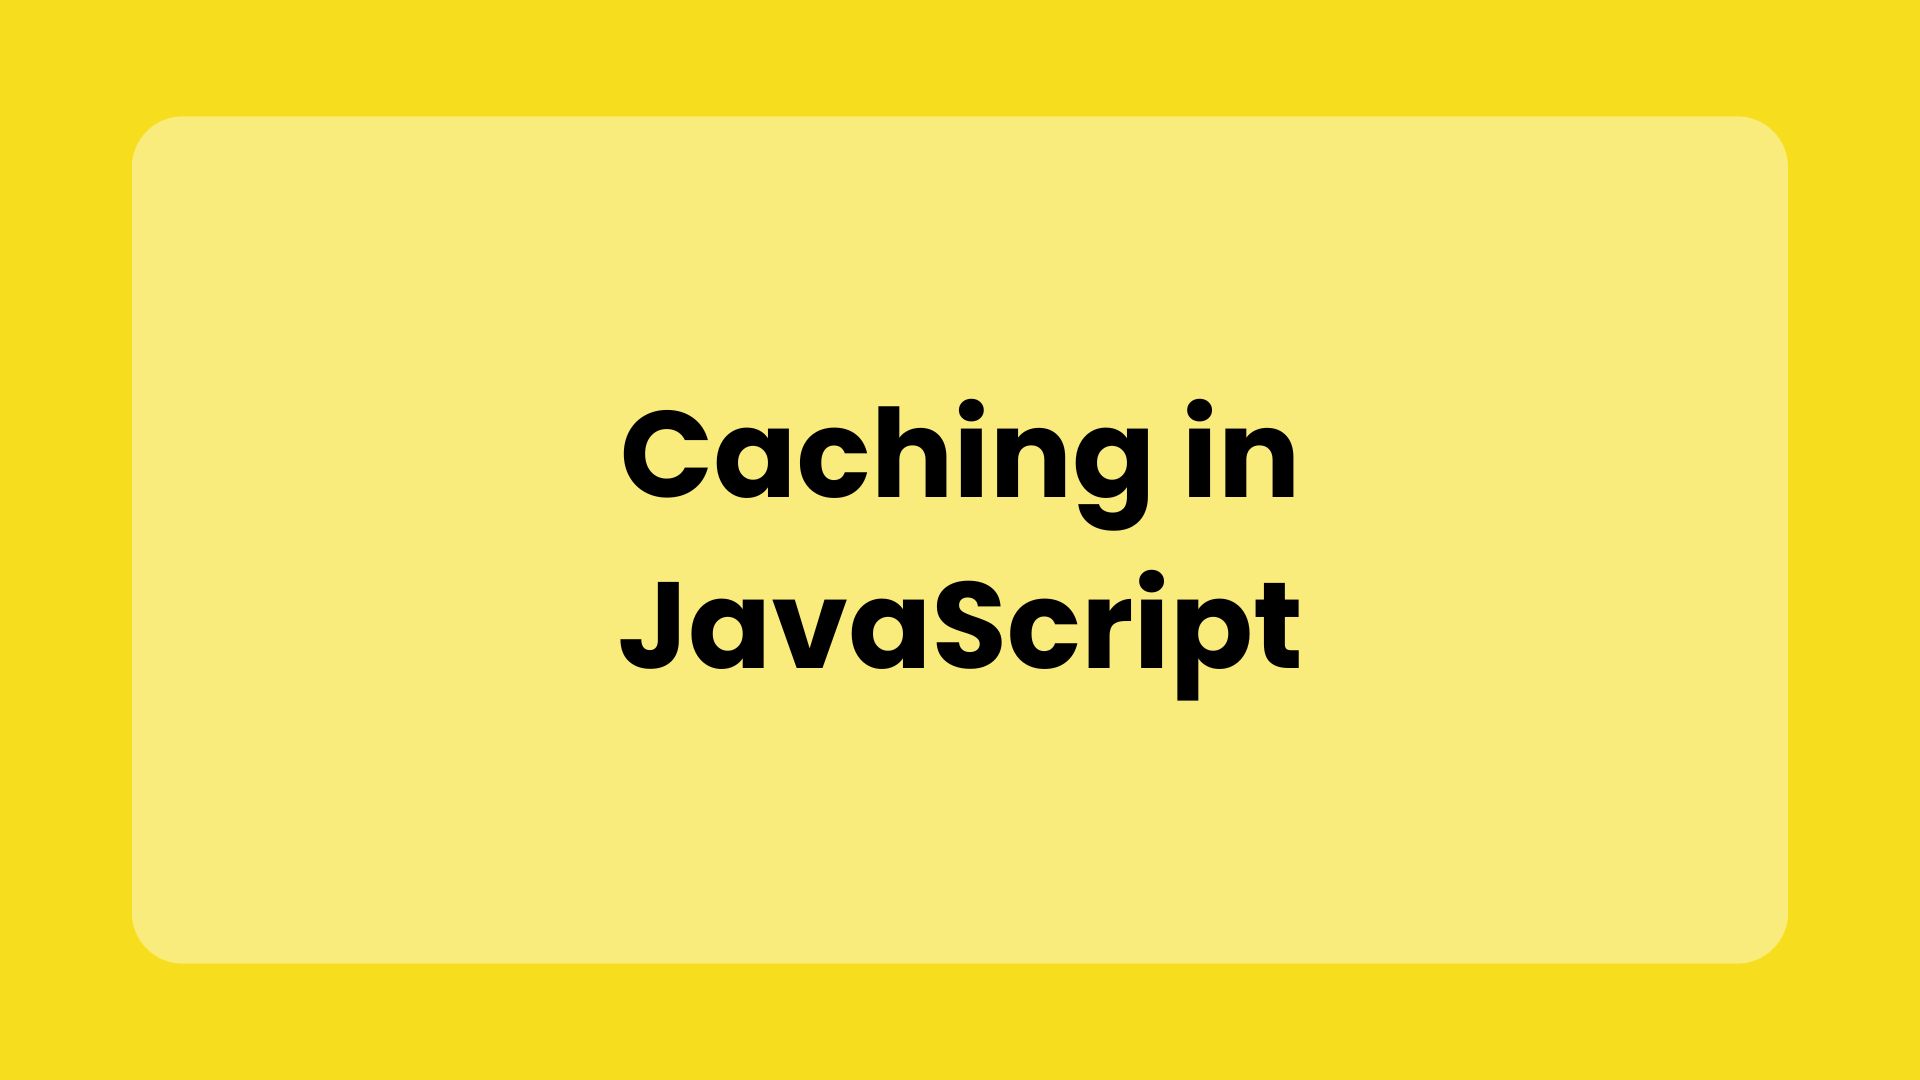 Caching in JavaScript